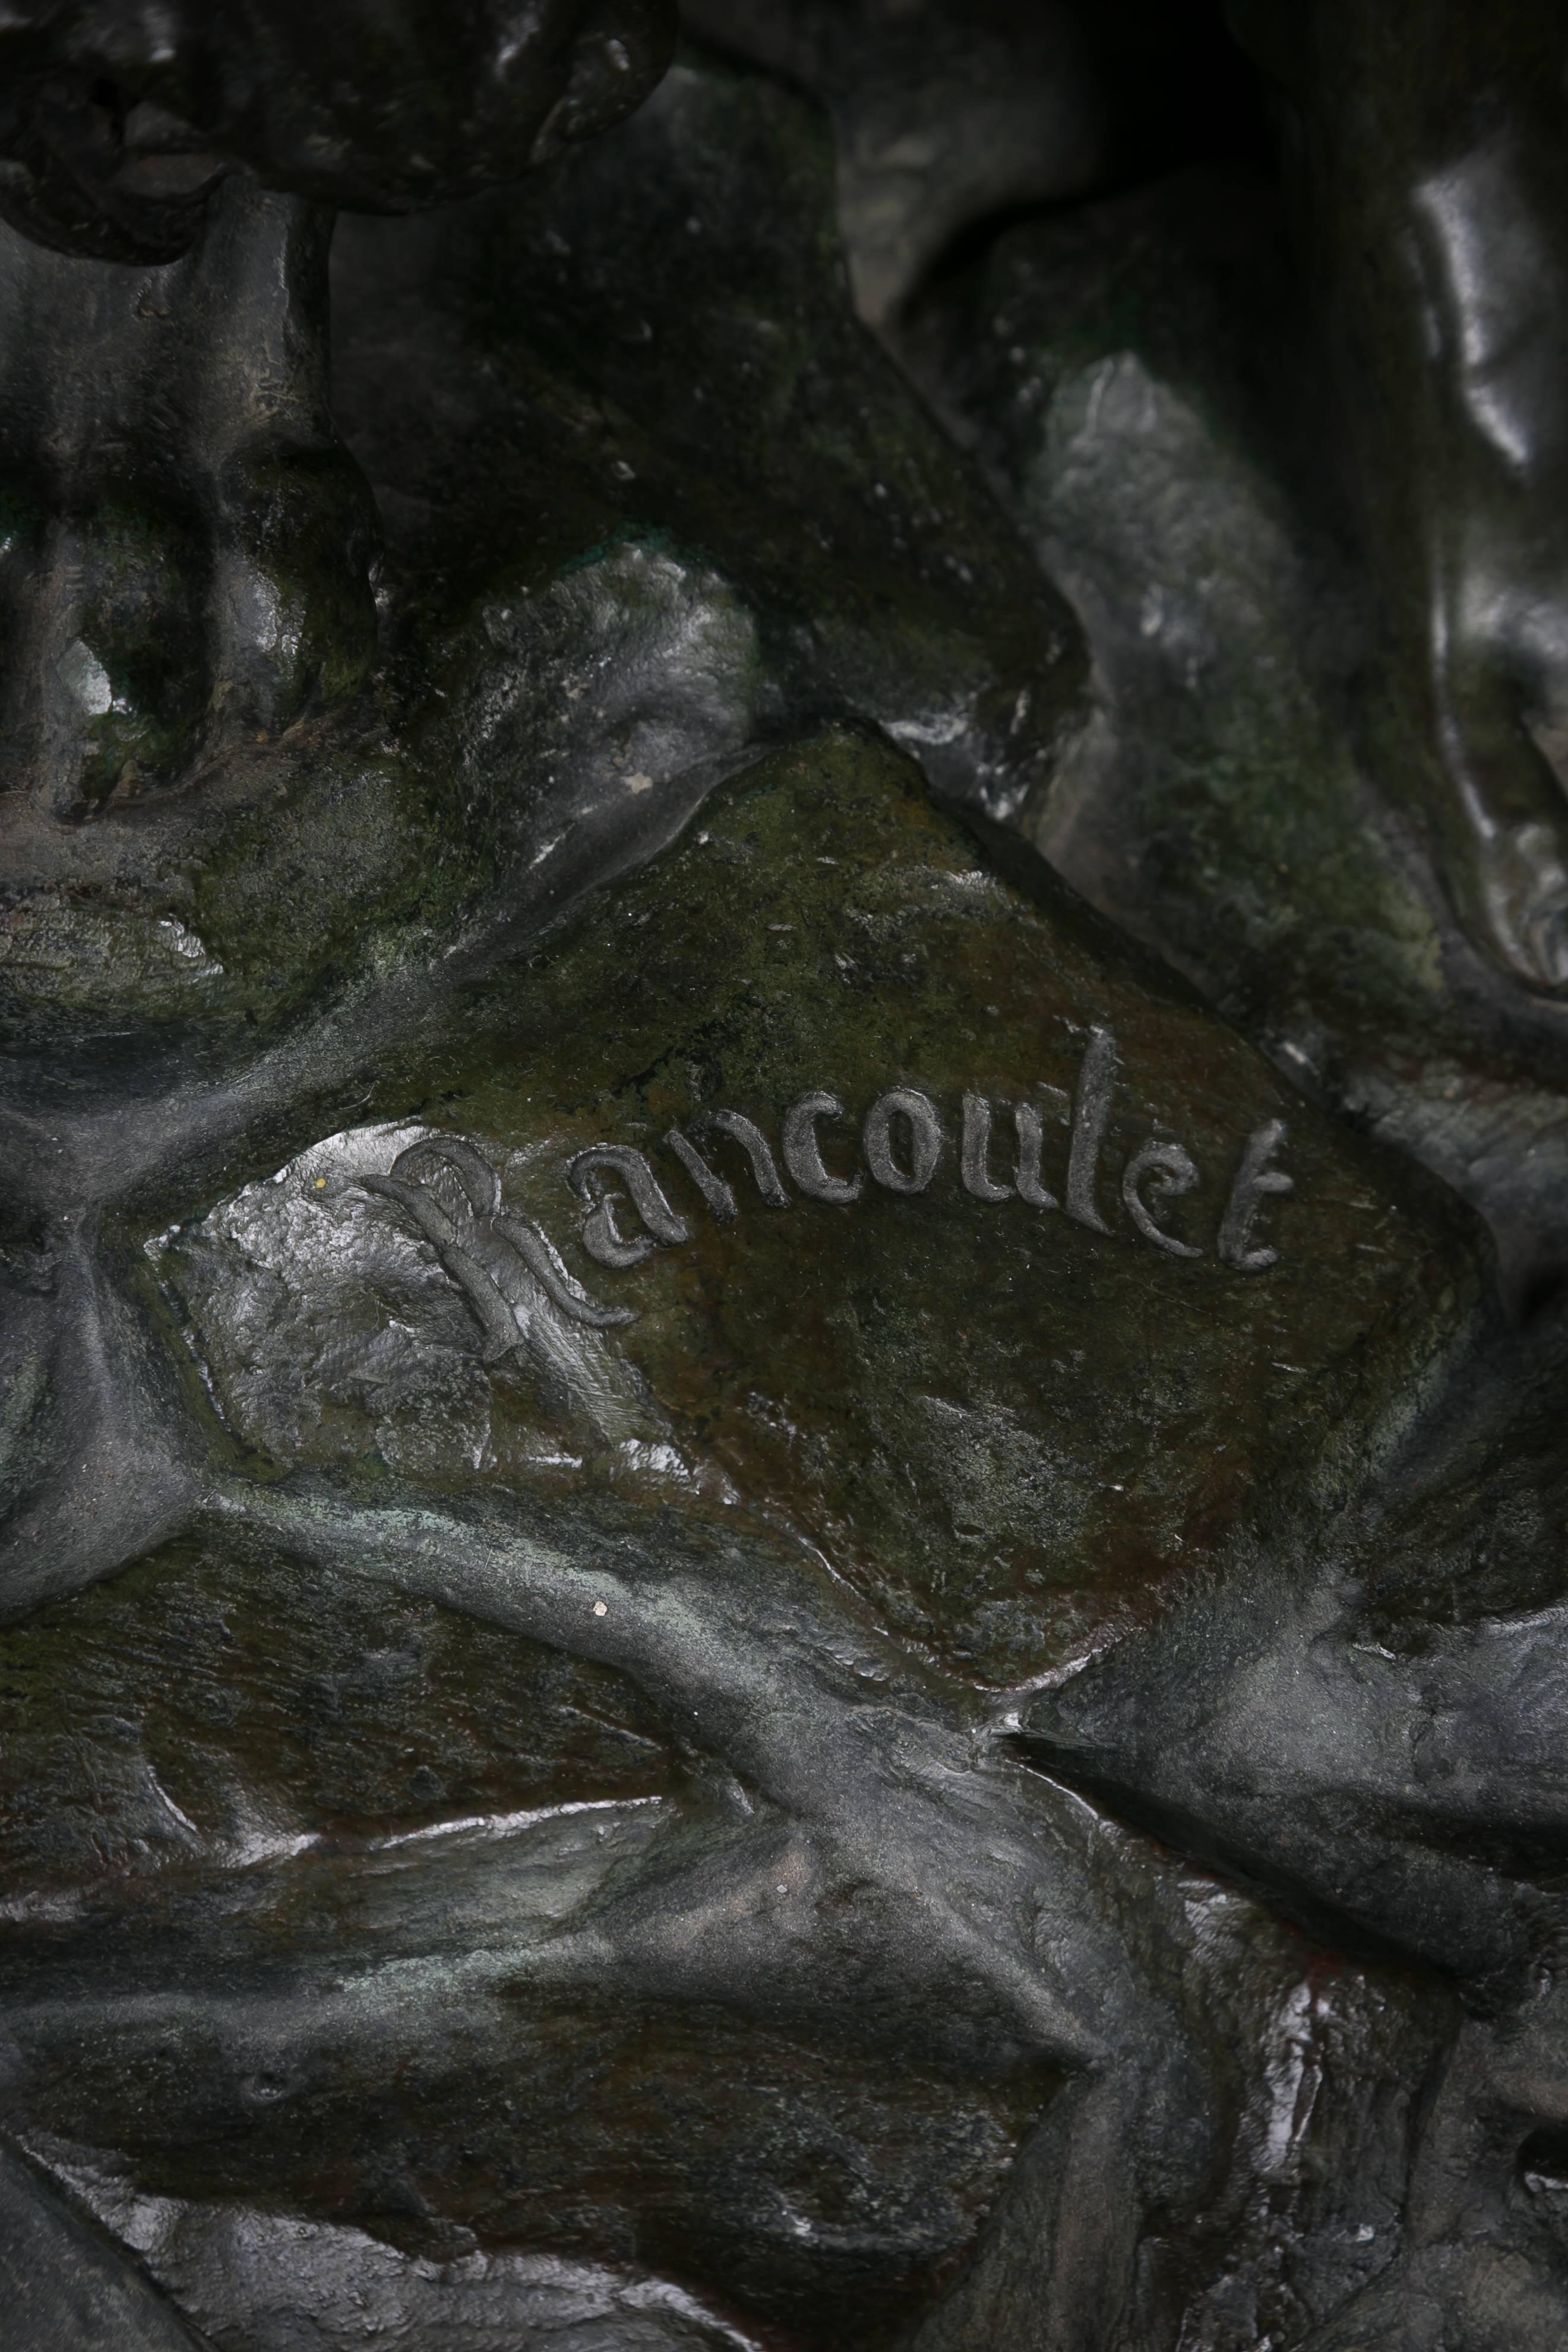 Signed Rancoulet. The bronze depicts the twelfth labor of Hercules.